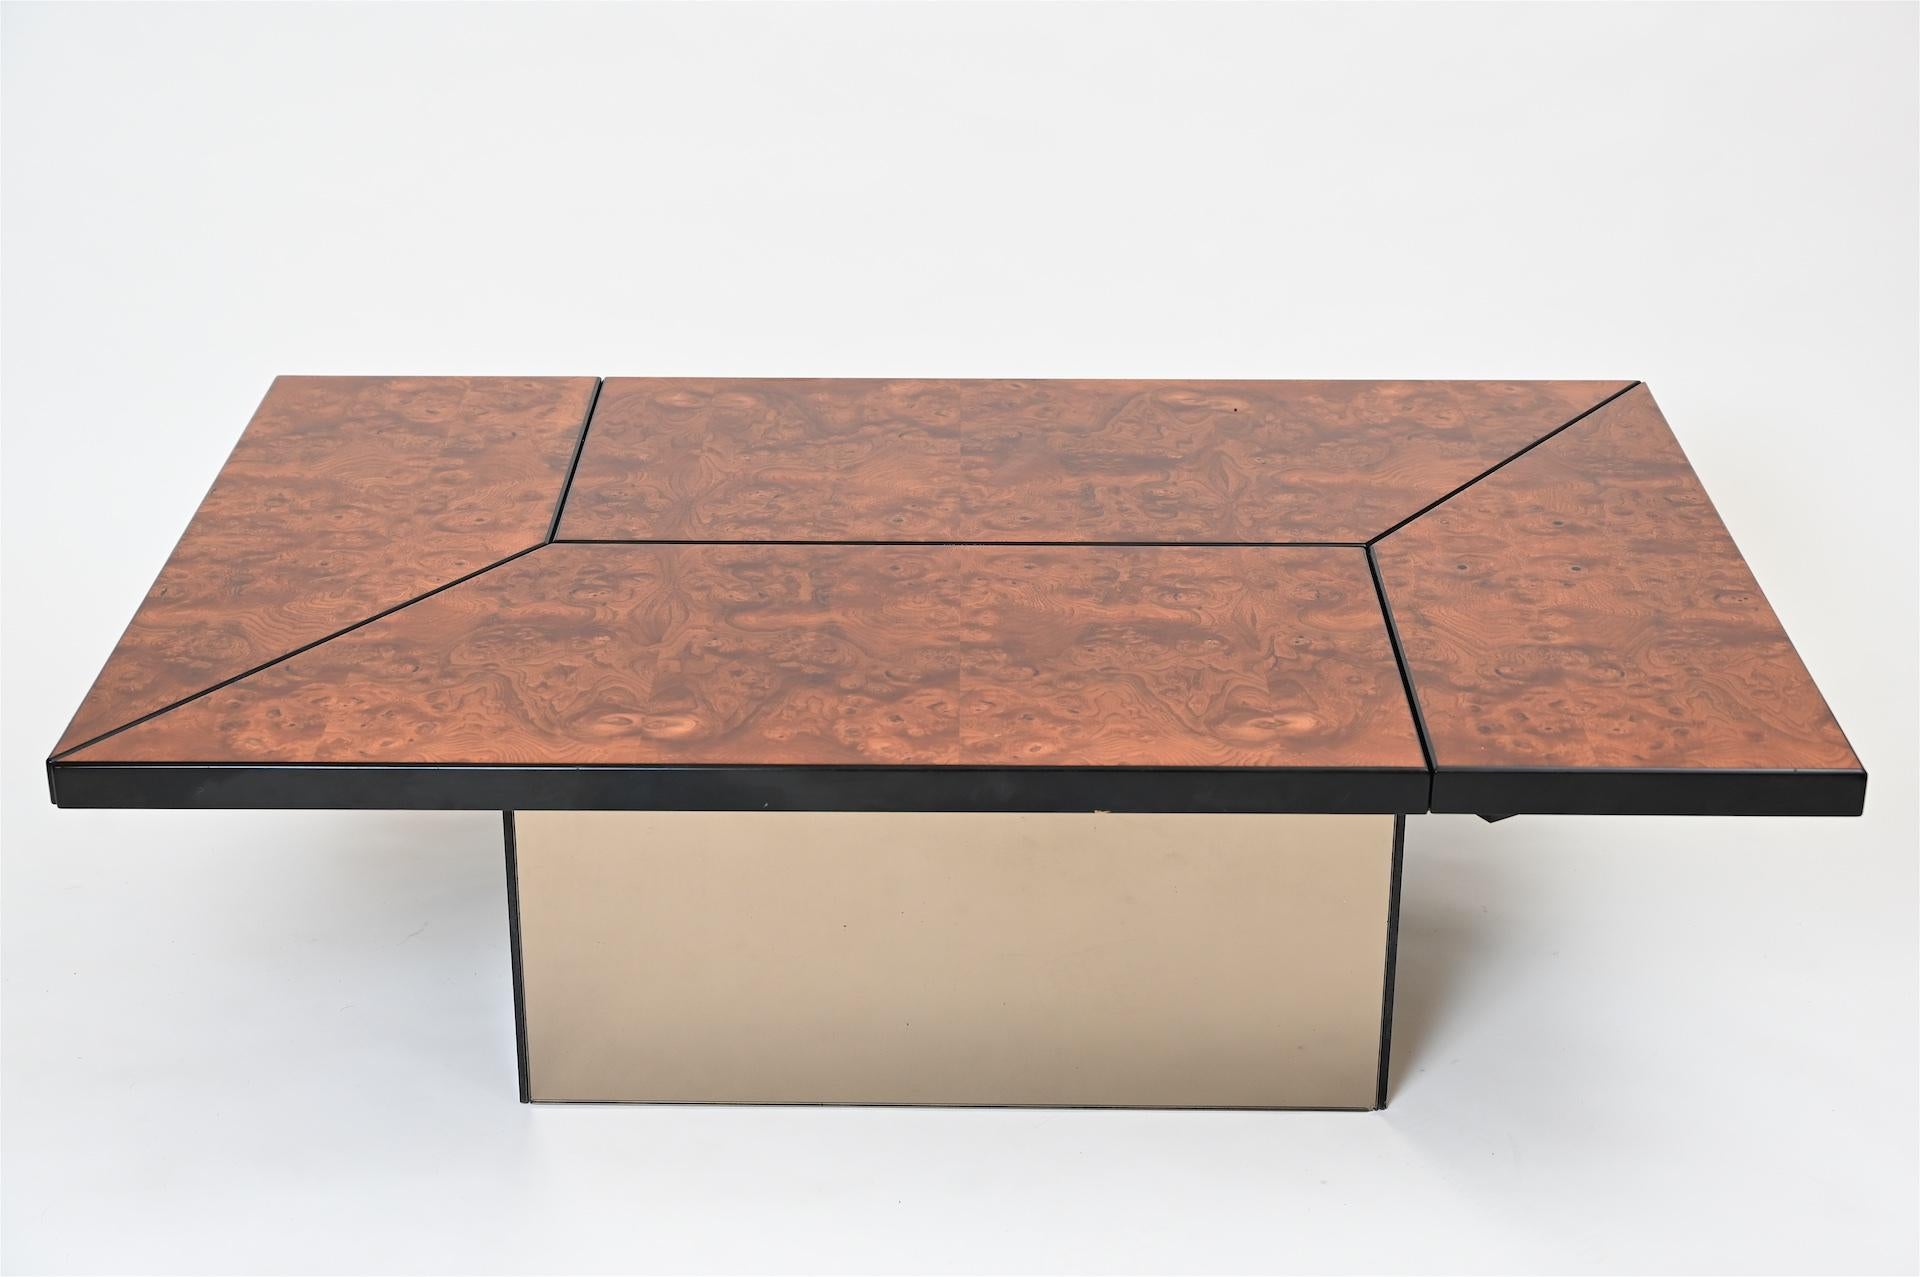 A Paul Michel 1970s and burr walnut and ebonized metamorphic cocktail coffee table. 
Opens to reveal a central mirrored drinks storage section.

In good working order and in excellent condition.